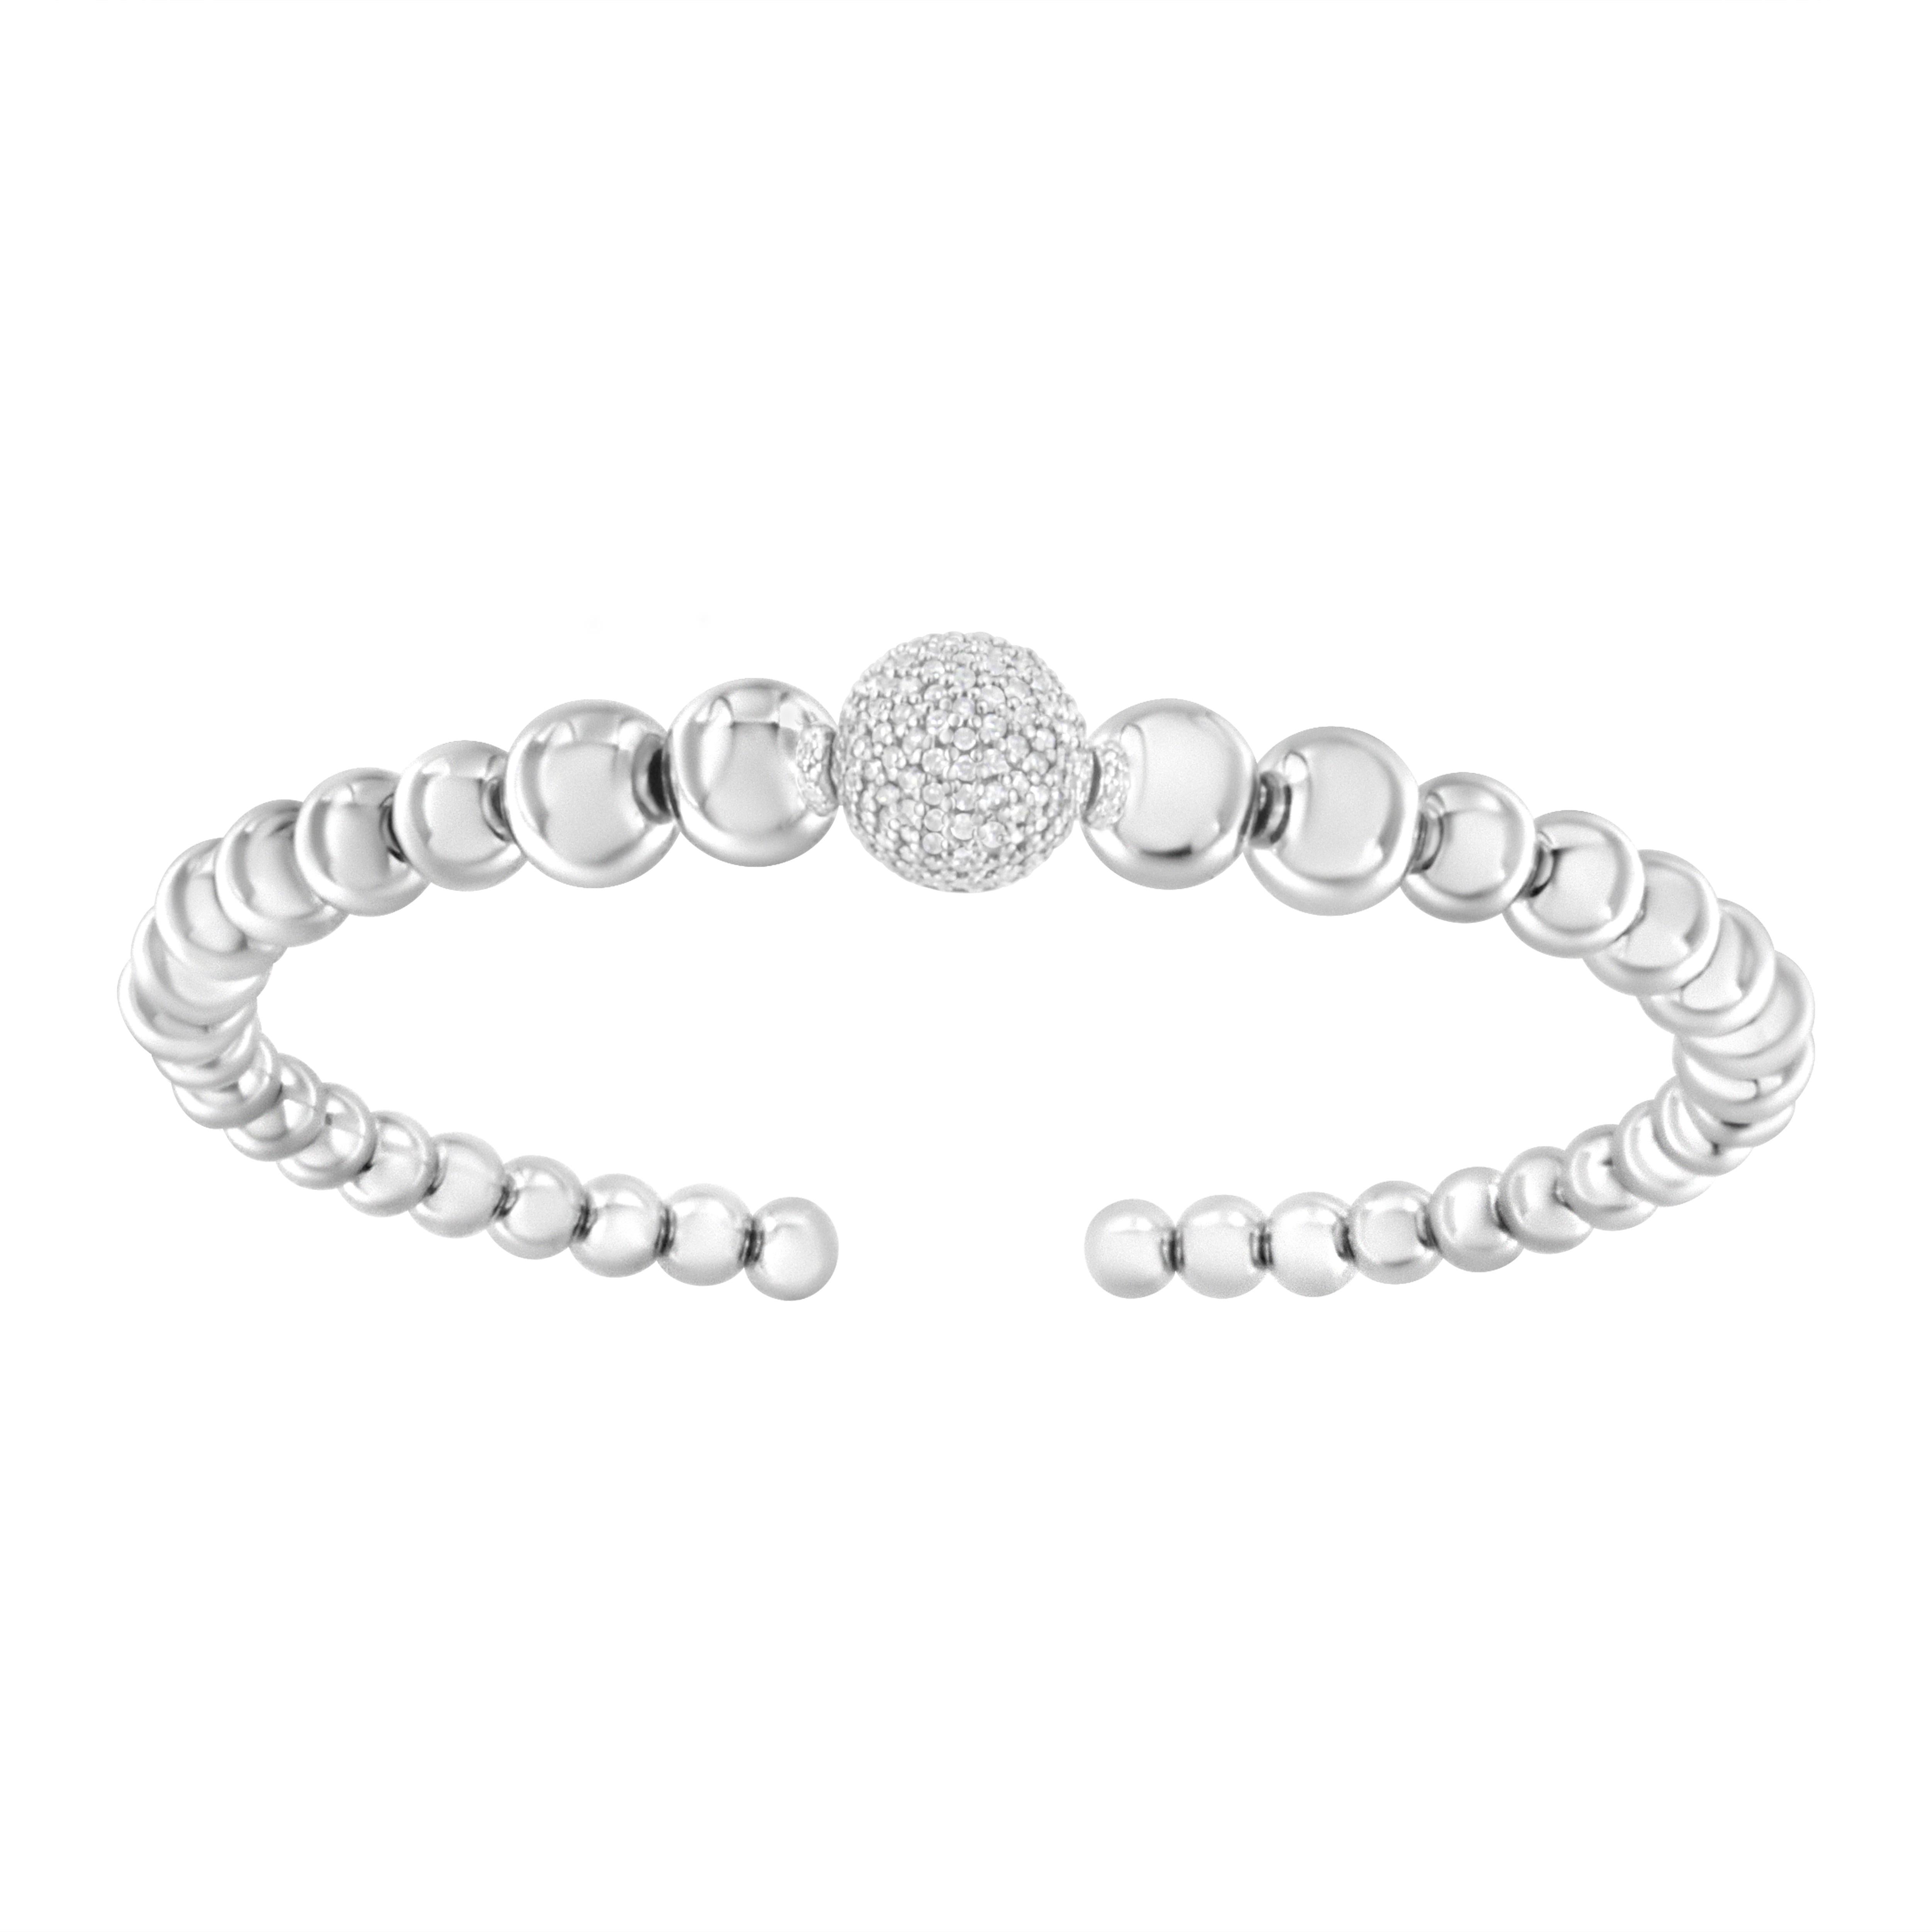 Simple yet elegant, this bangle cuff bracelet is a great anytime look. Strands of sleek sterling silver come together to form round ball links.  Loops of diamond accented bands alternate between each ball with shimmering diamond accents that add a